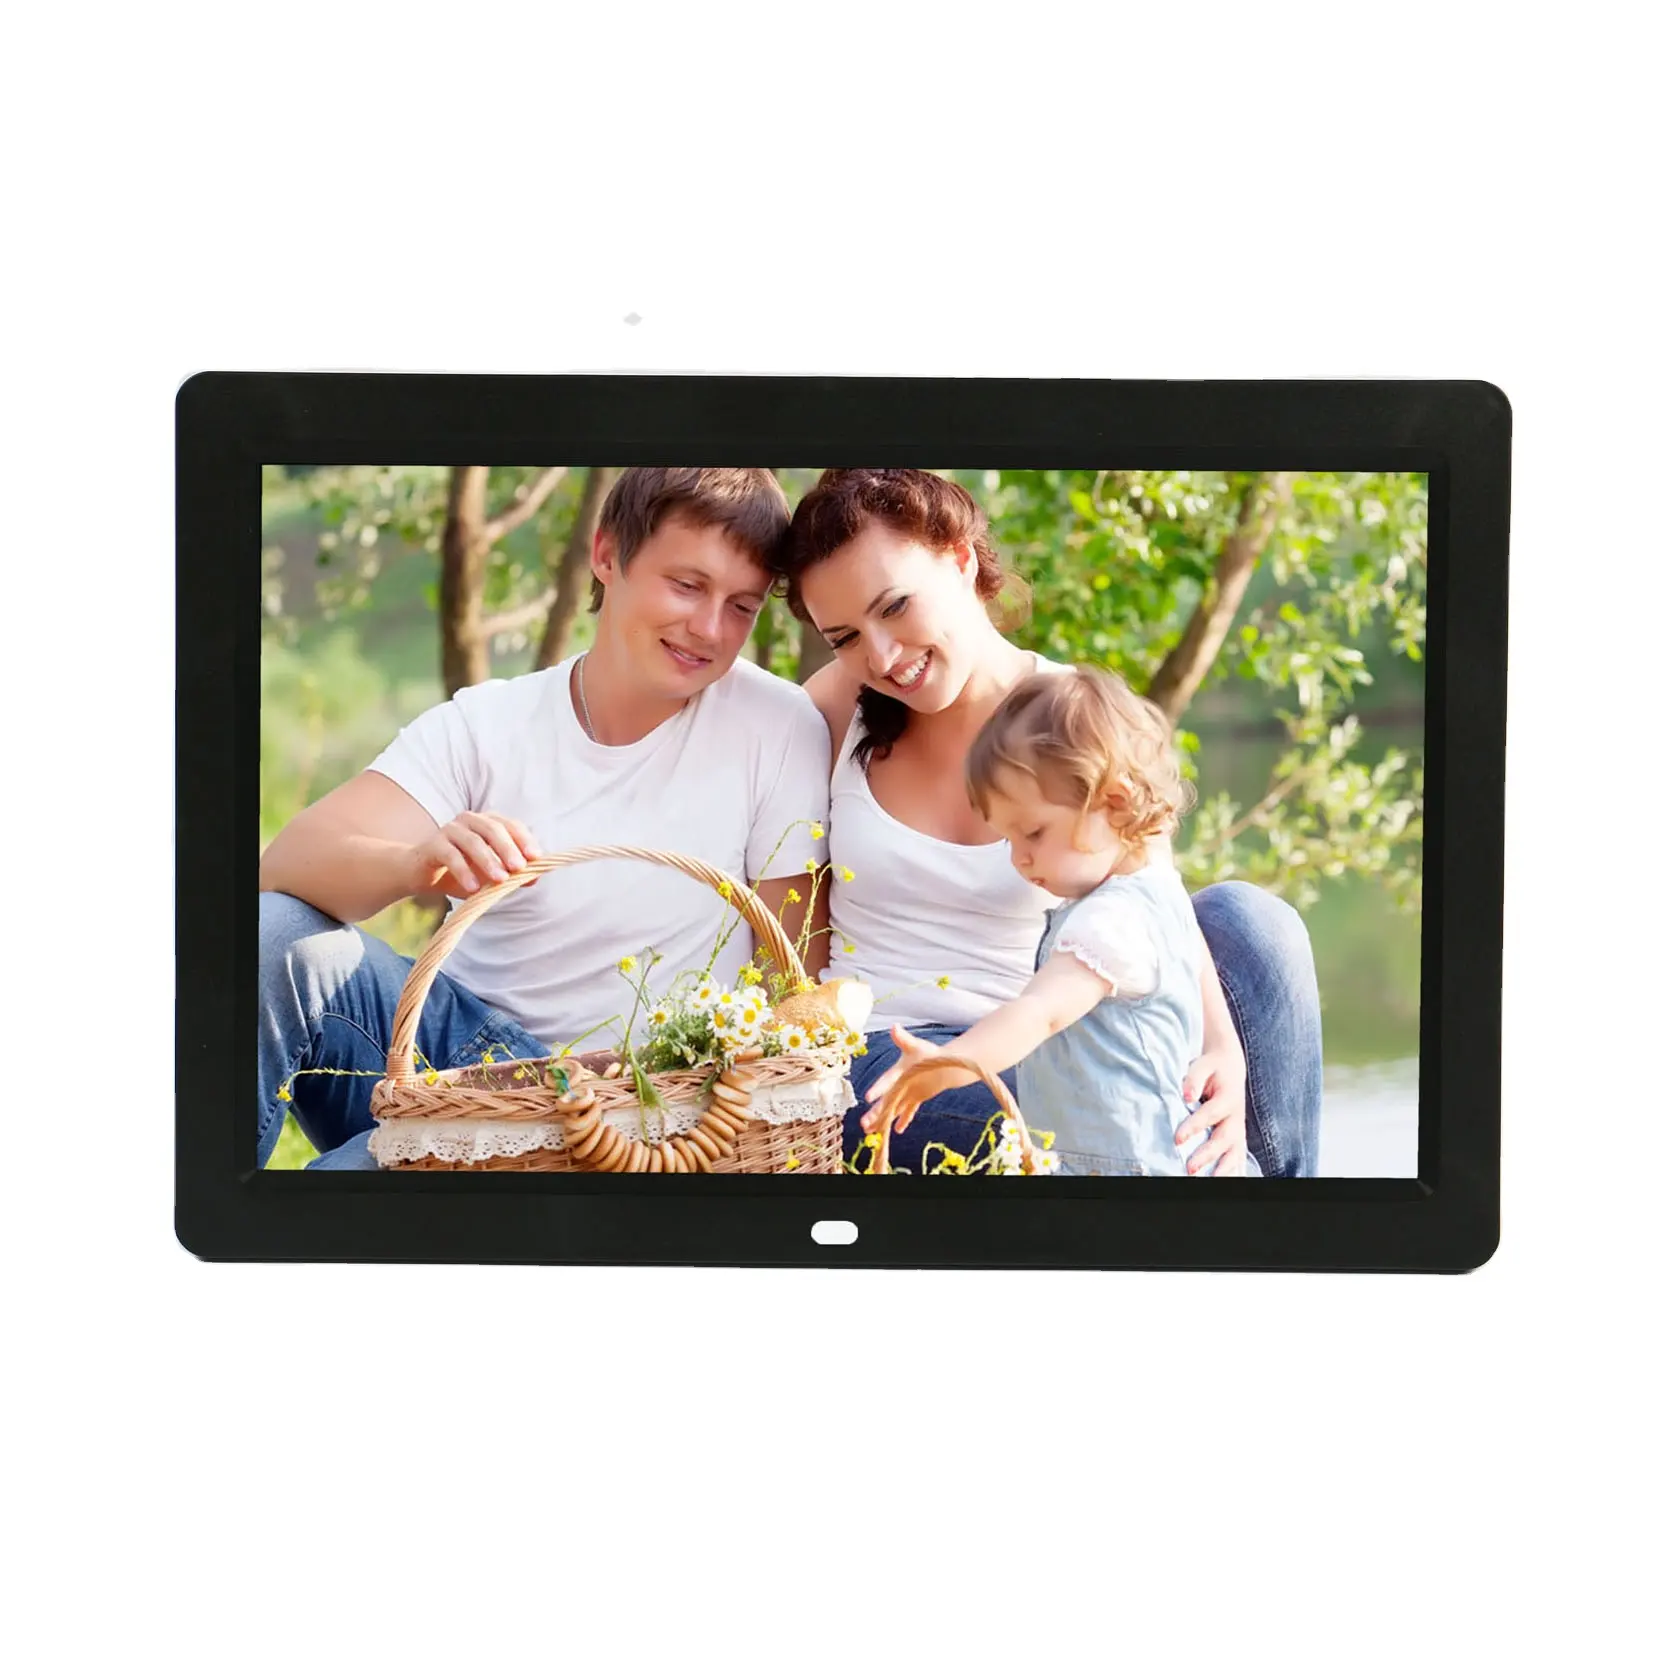 12.1" inch widescreen LCD video player multimedia monitor support HD 1080P and landscape / portrait display mode full viewangle